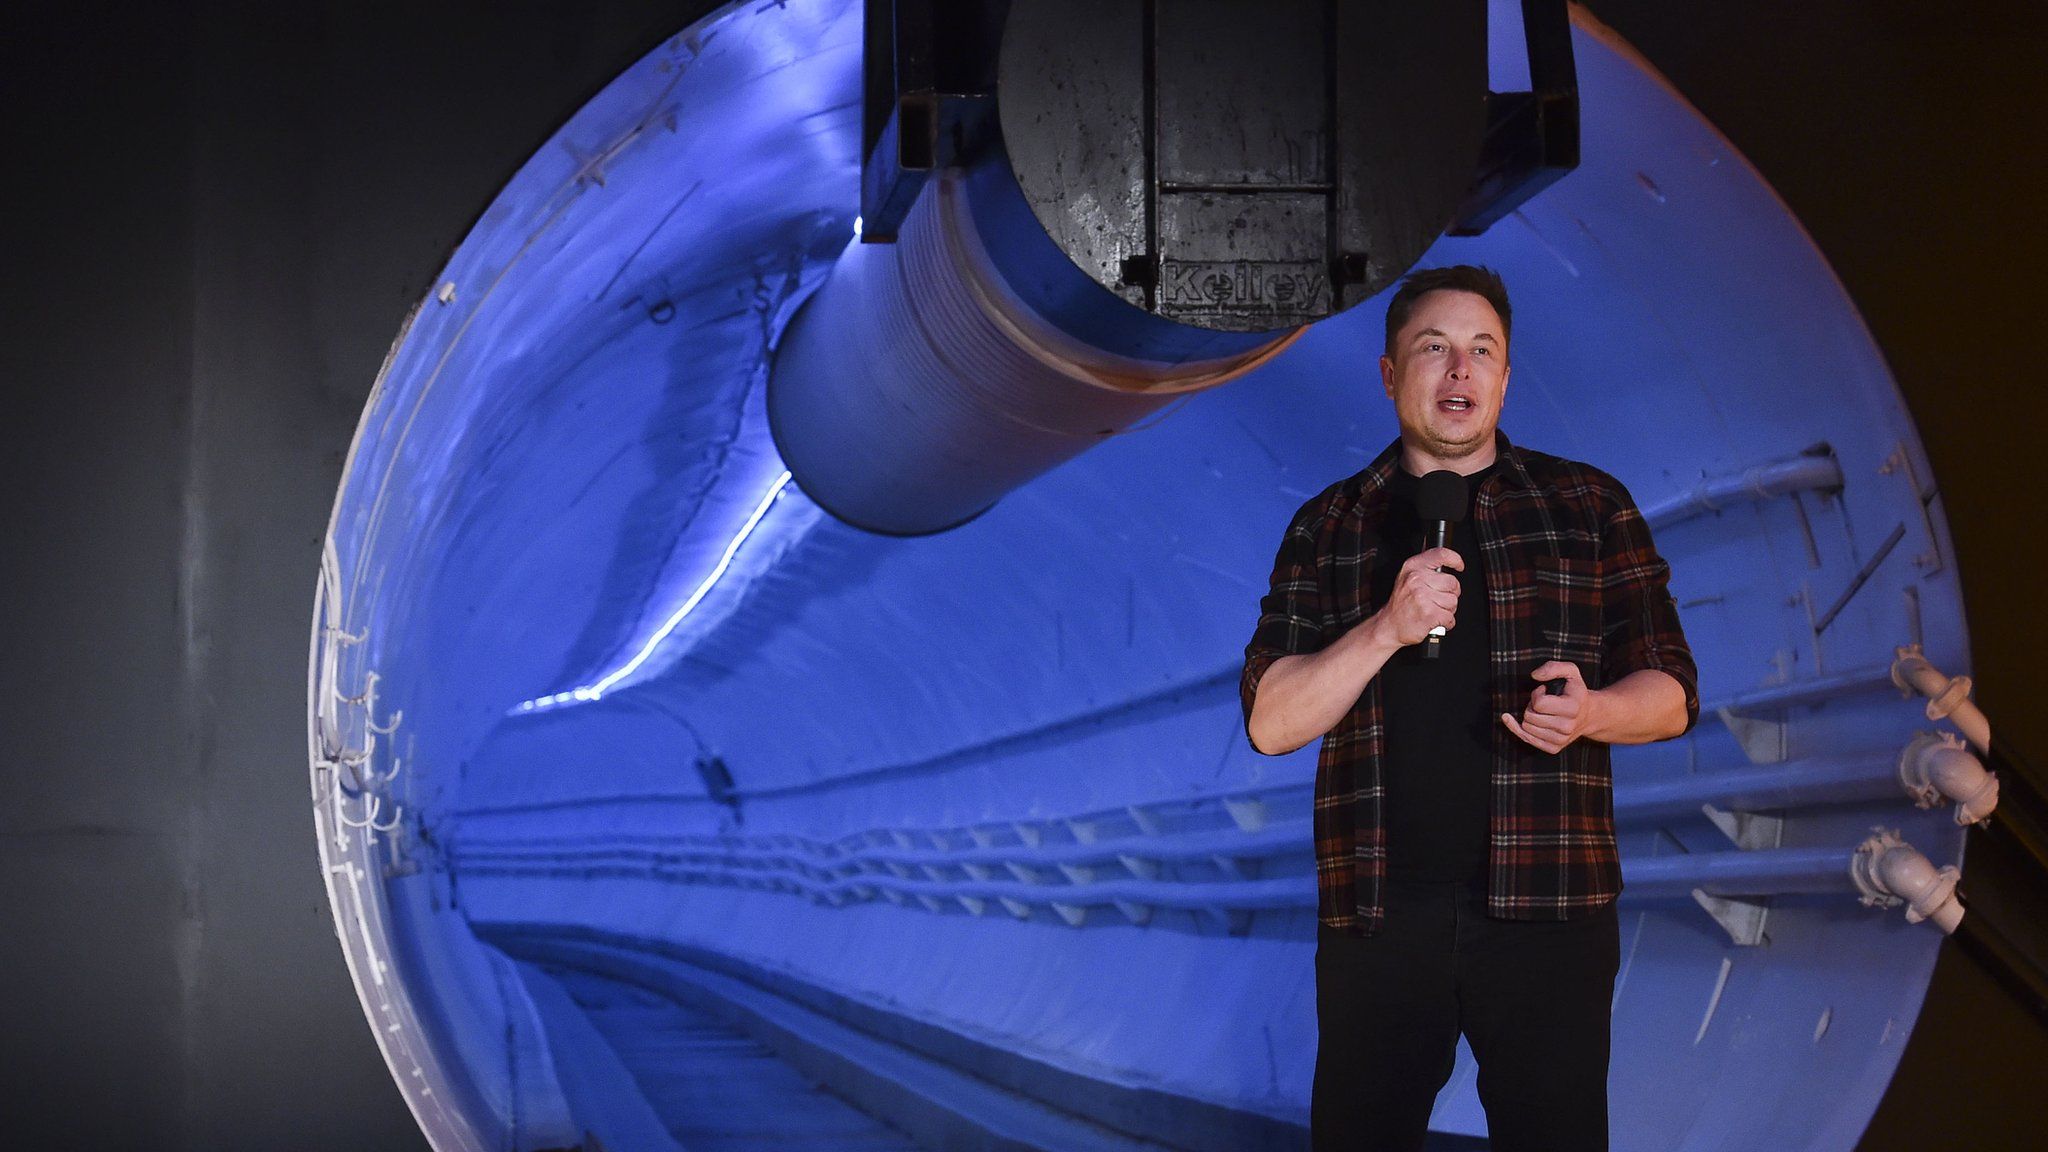 Elon Musk unveils test tunnel in Hawthorne, south of Los Angeles, California on December 18, 2018.